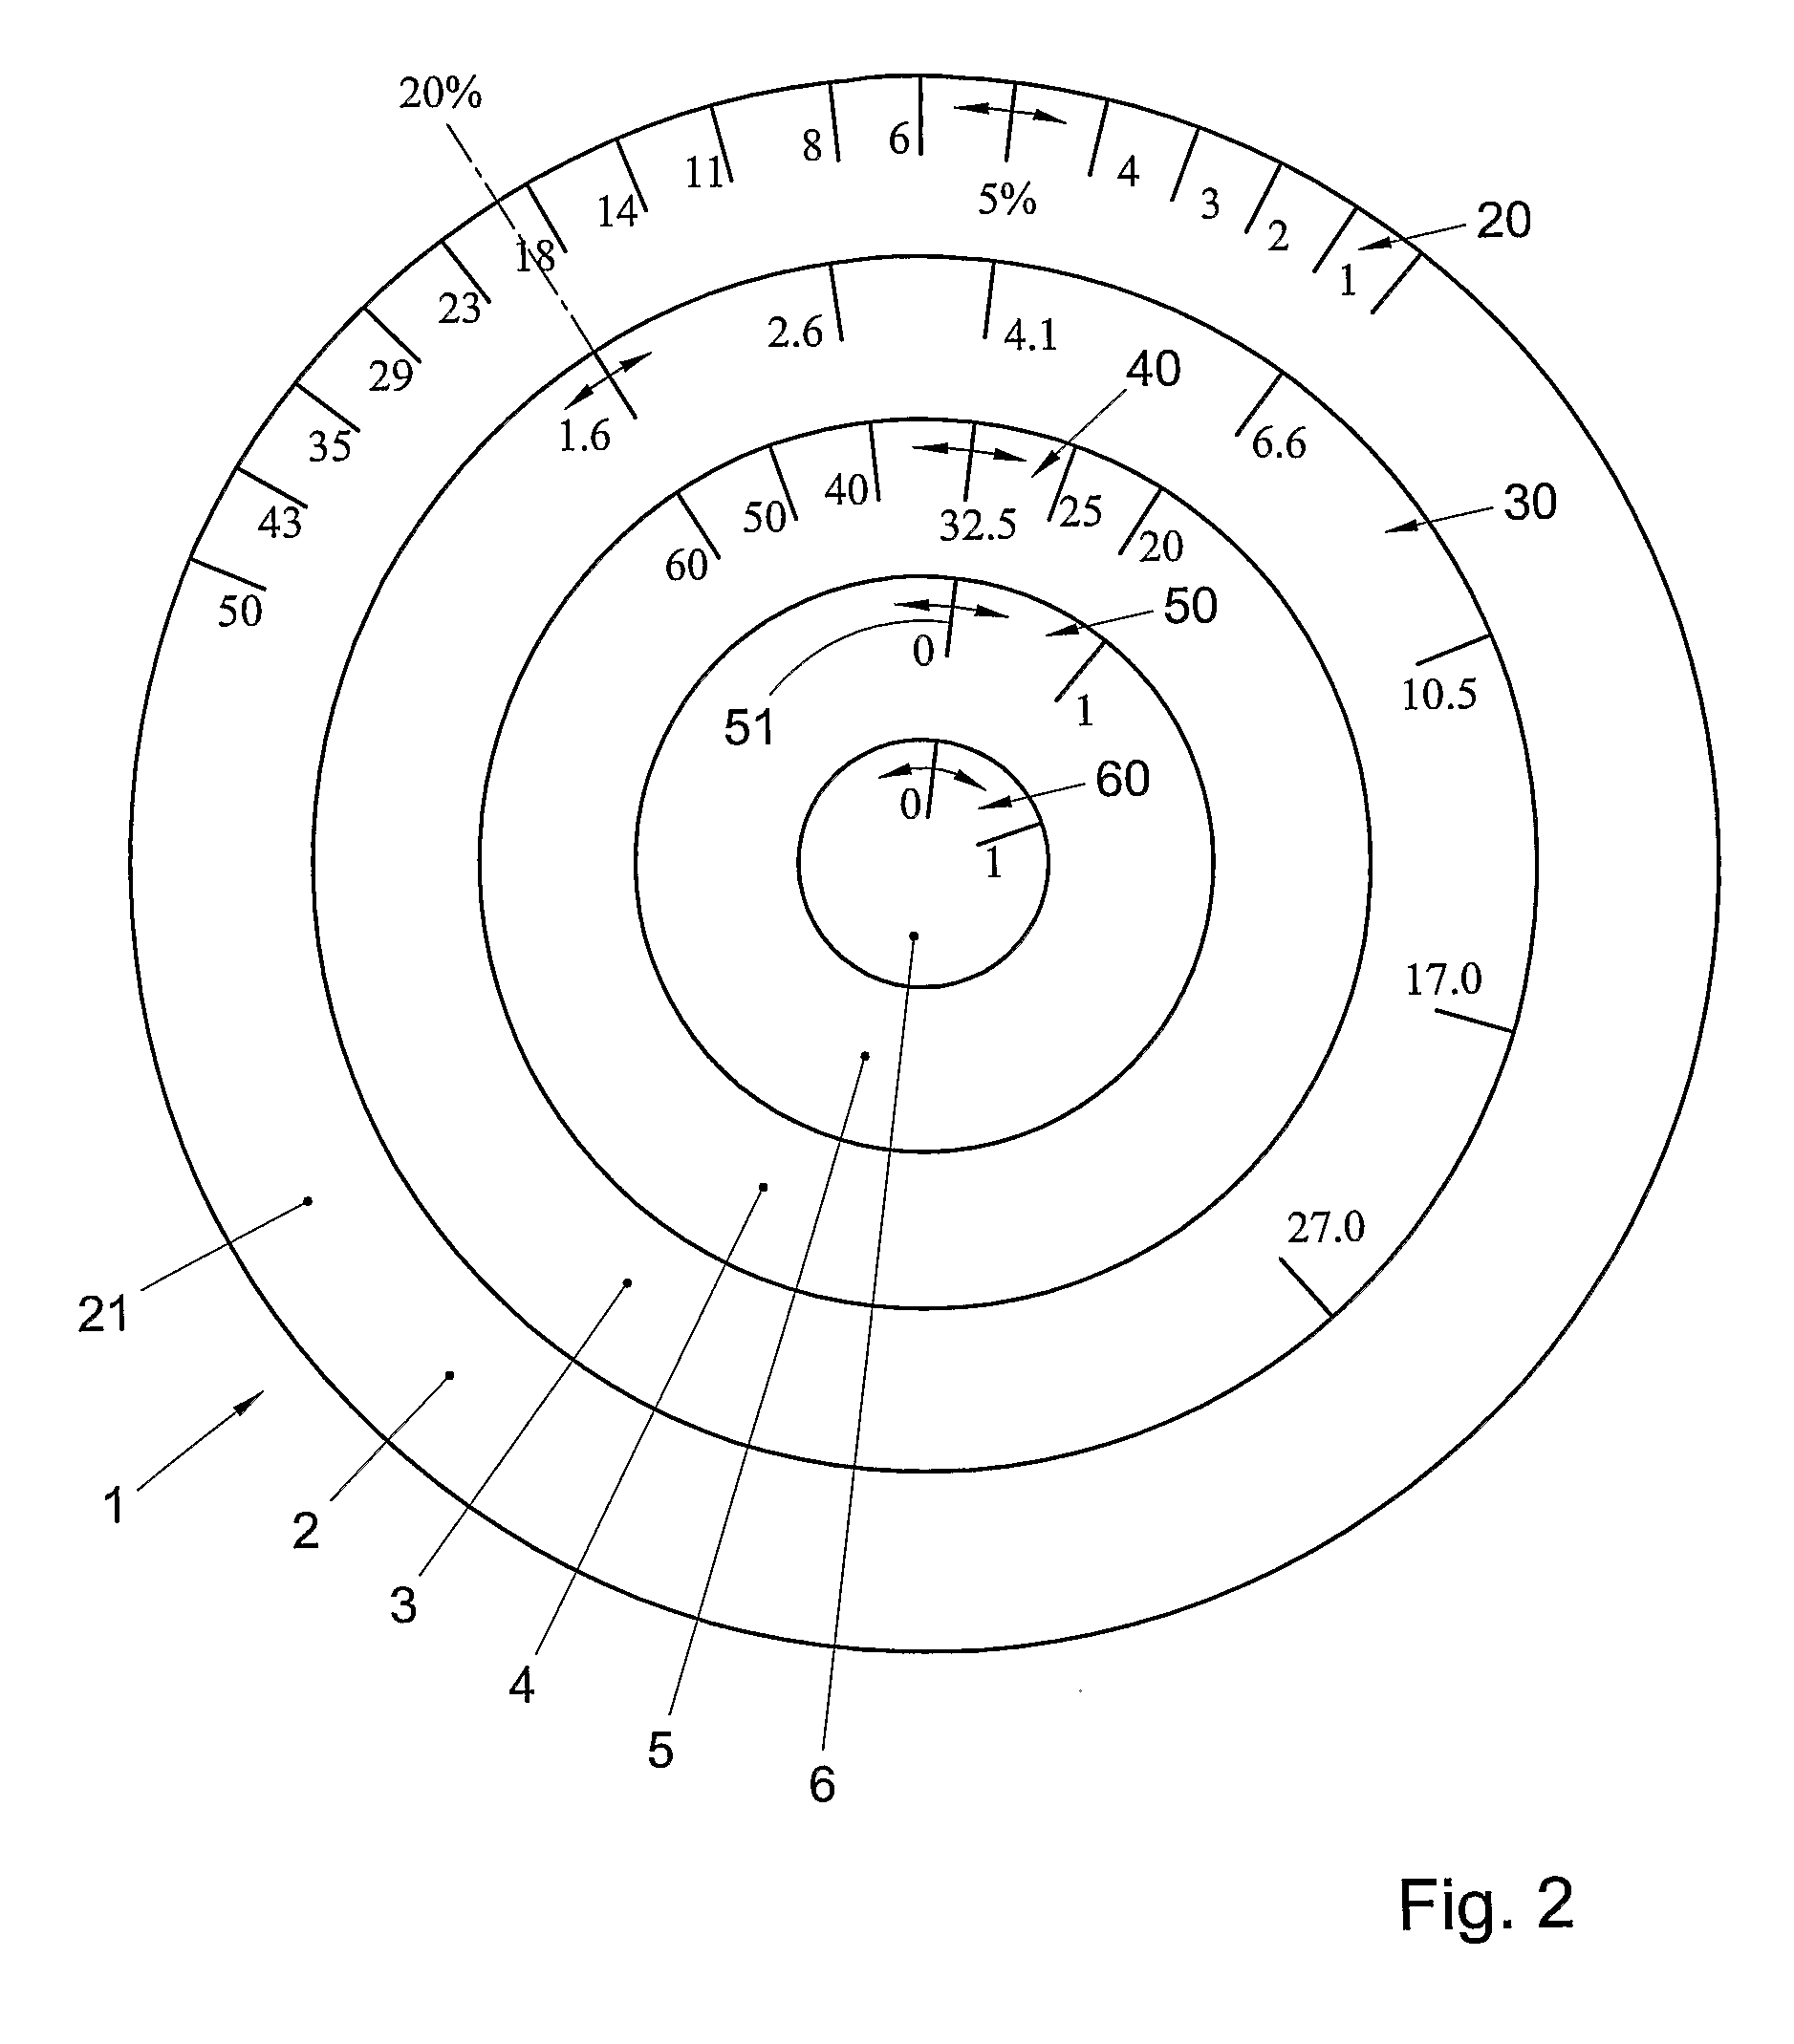 Data storage device and method for determining the dependency of the risk for prostate cancer, device and method for indicating a risk for a disease of an individual